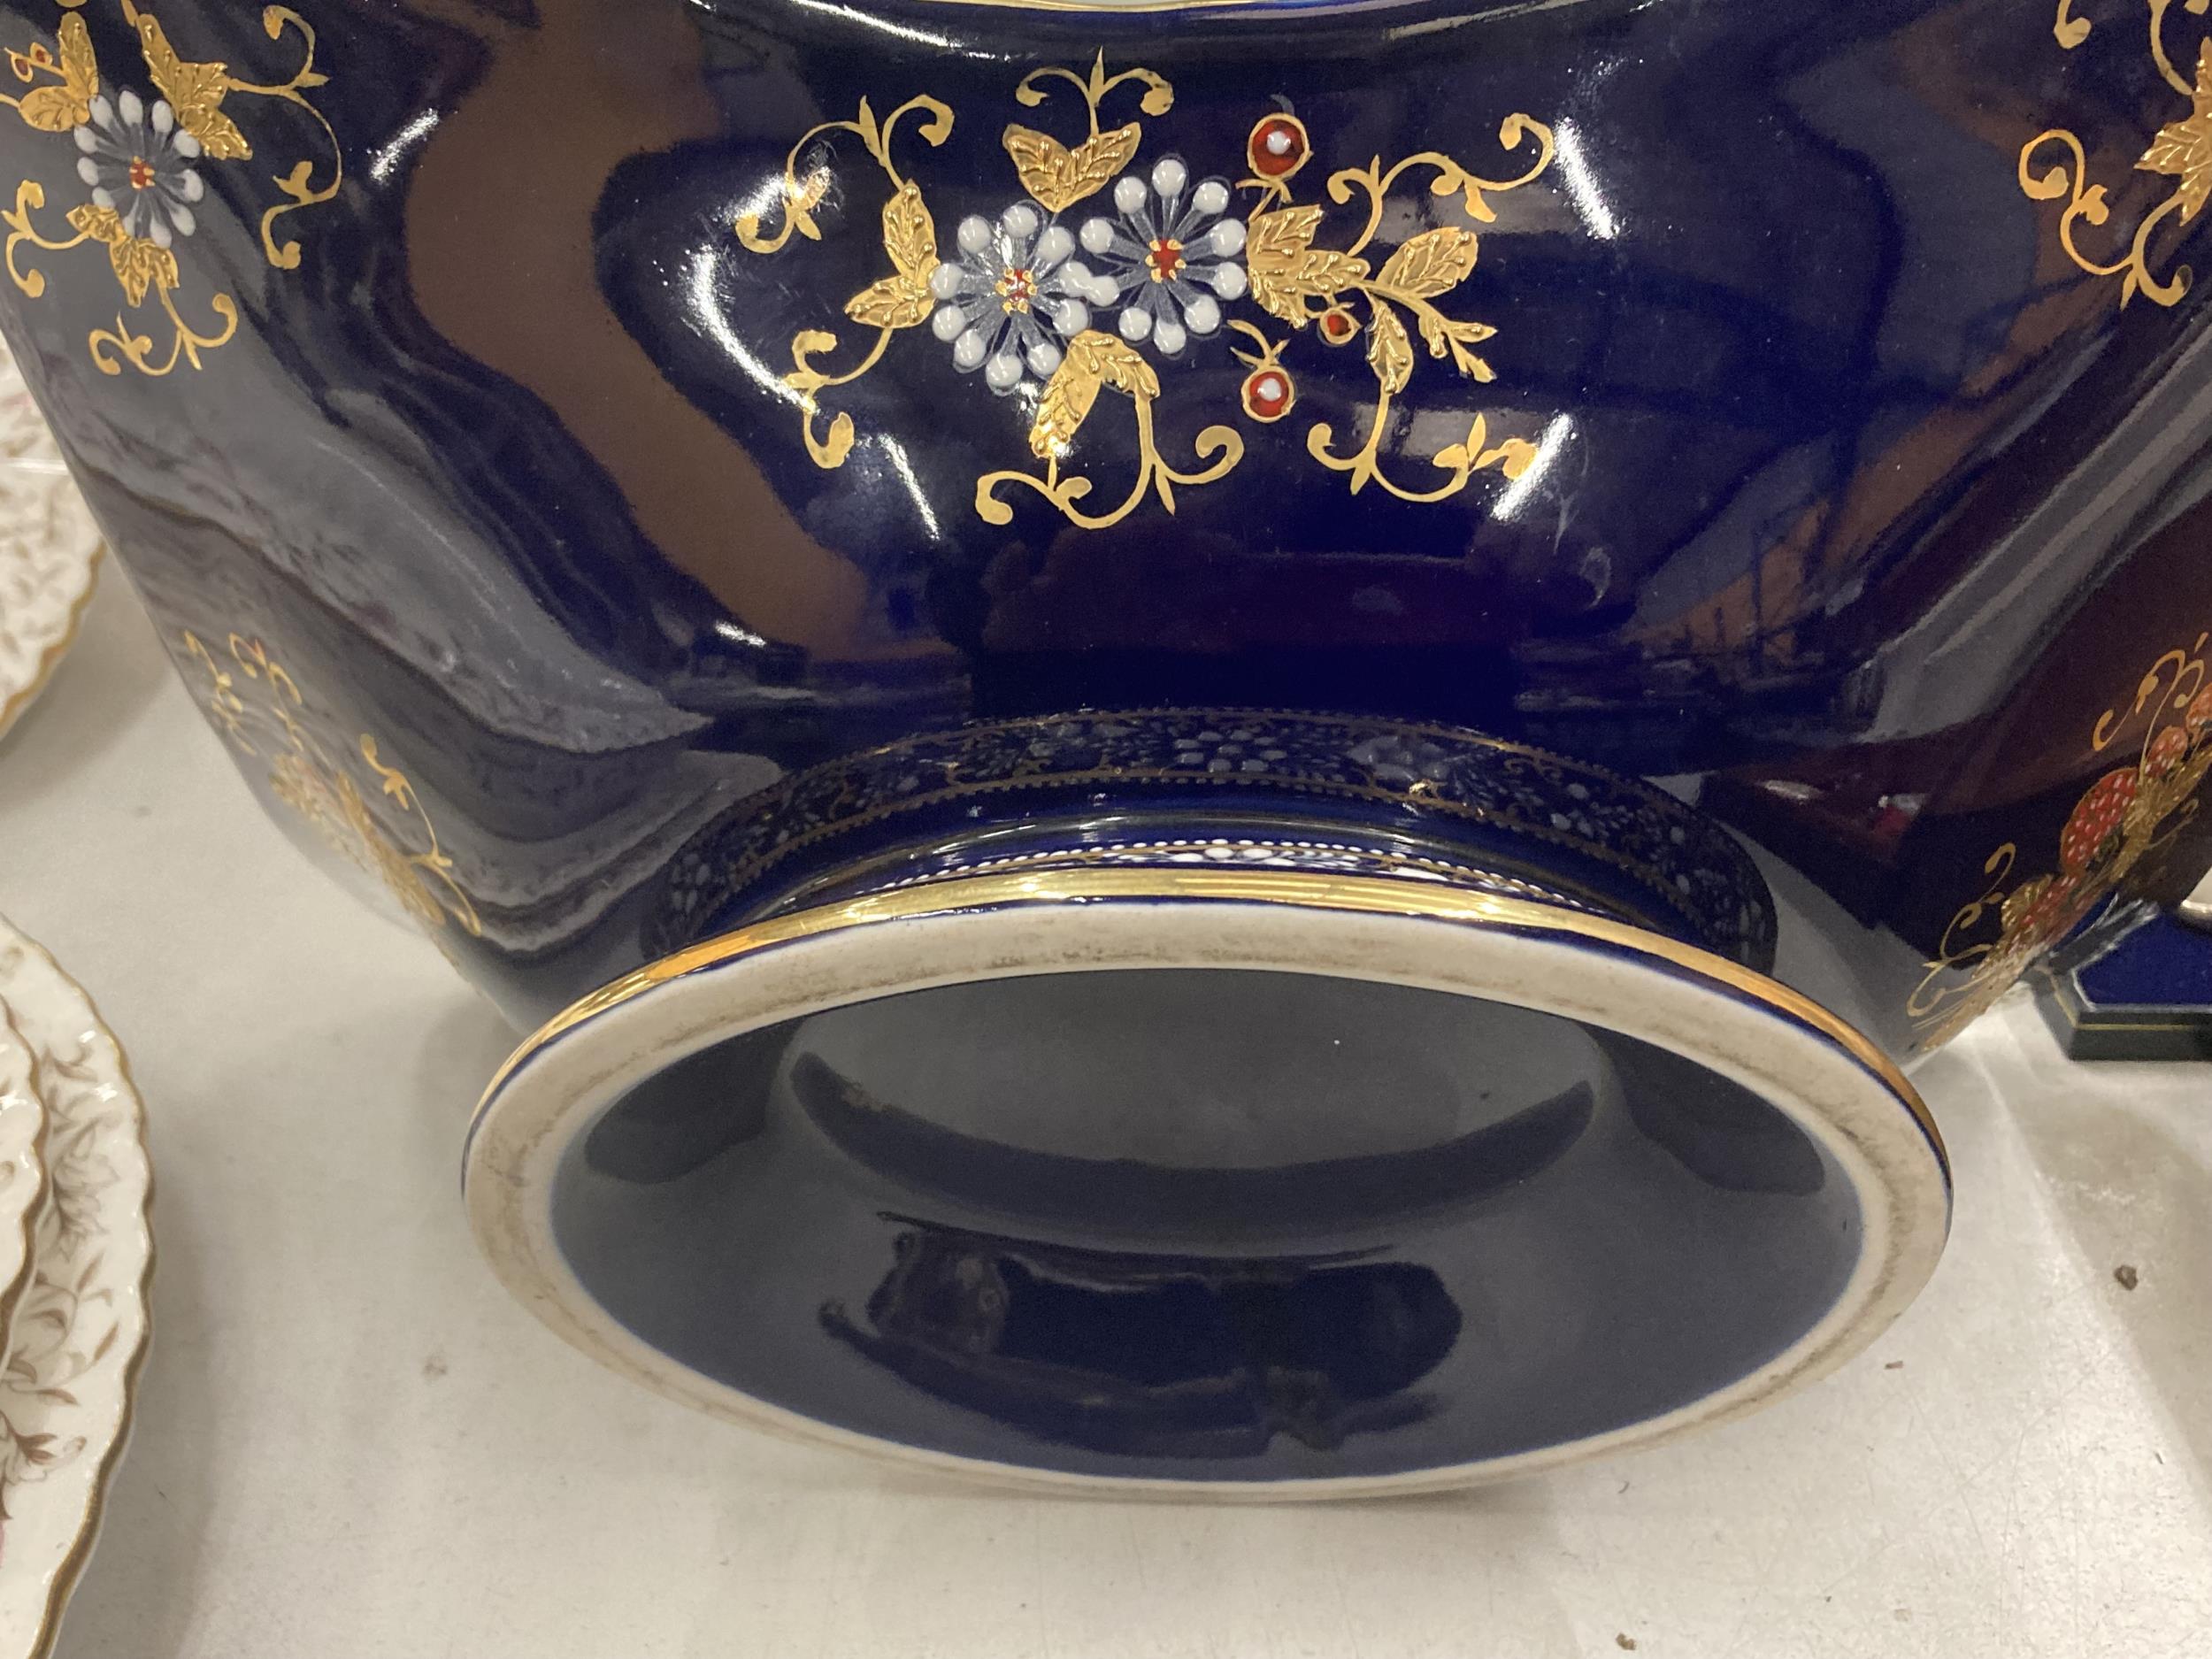 A COBALT BLUE AND GILT TWIN HANDLED BOWL WITH HAND PAINTED DESIGN, SIGNED L.MONET - Image 3 of 4